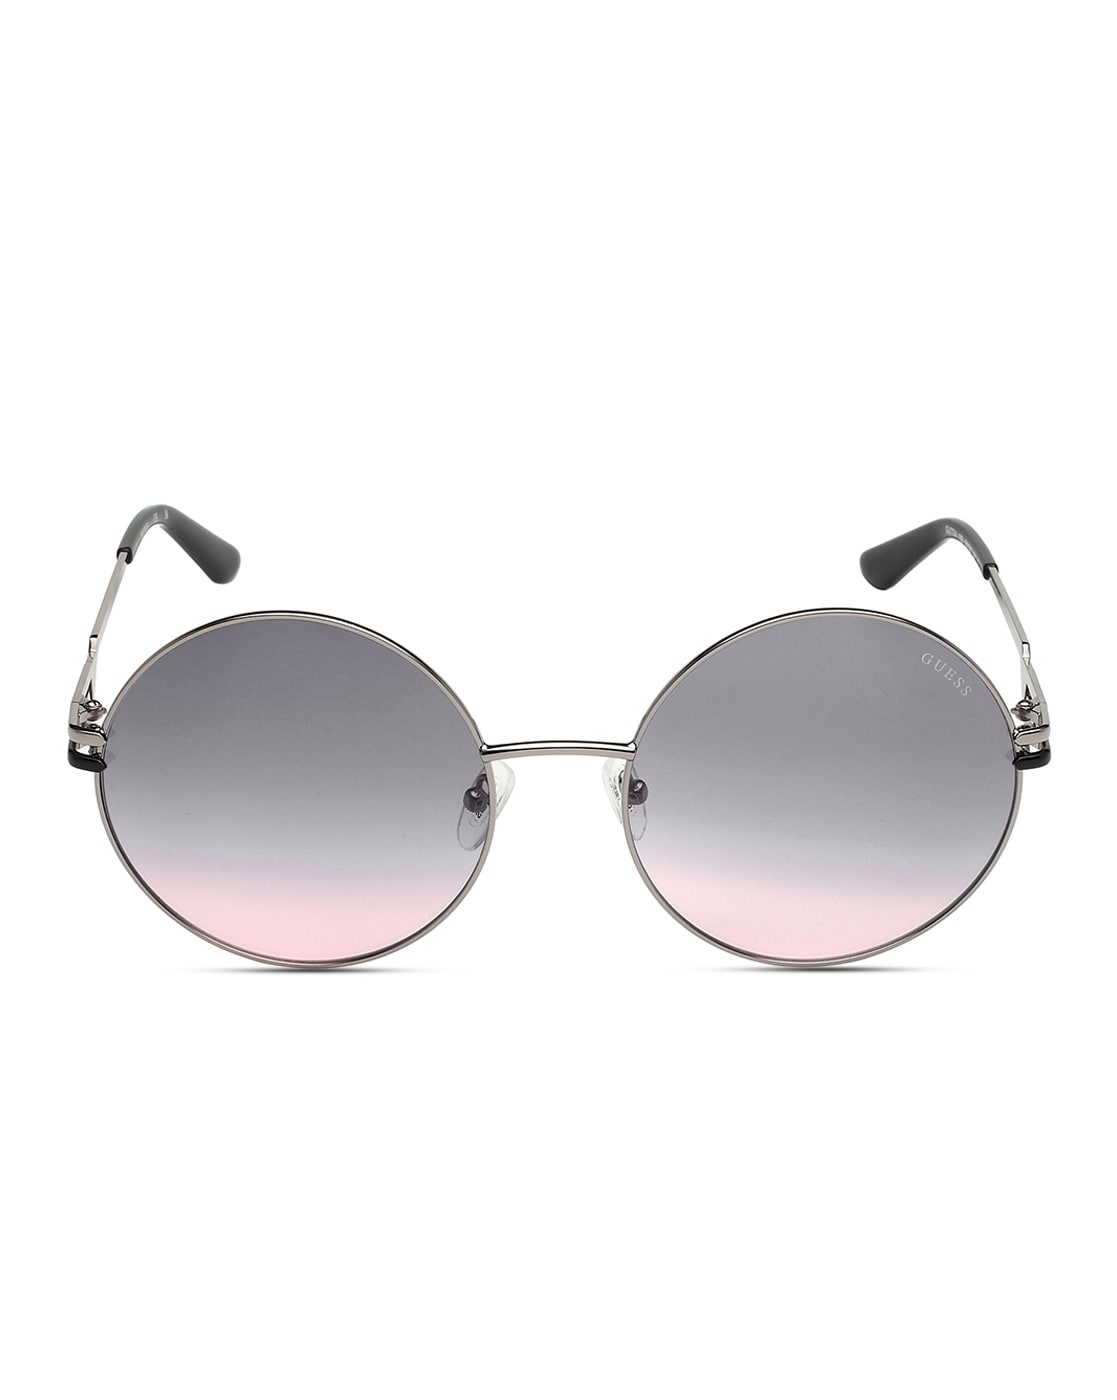 Guess Factory GF6188 Sunglasses Grey/other / Gradient Smoke Women's –  AmbrogioShoes